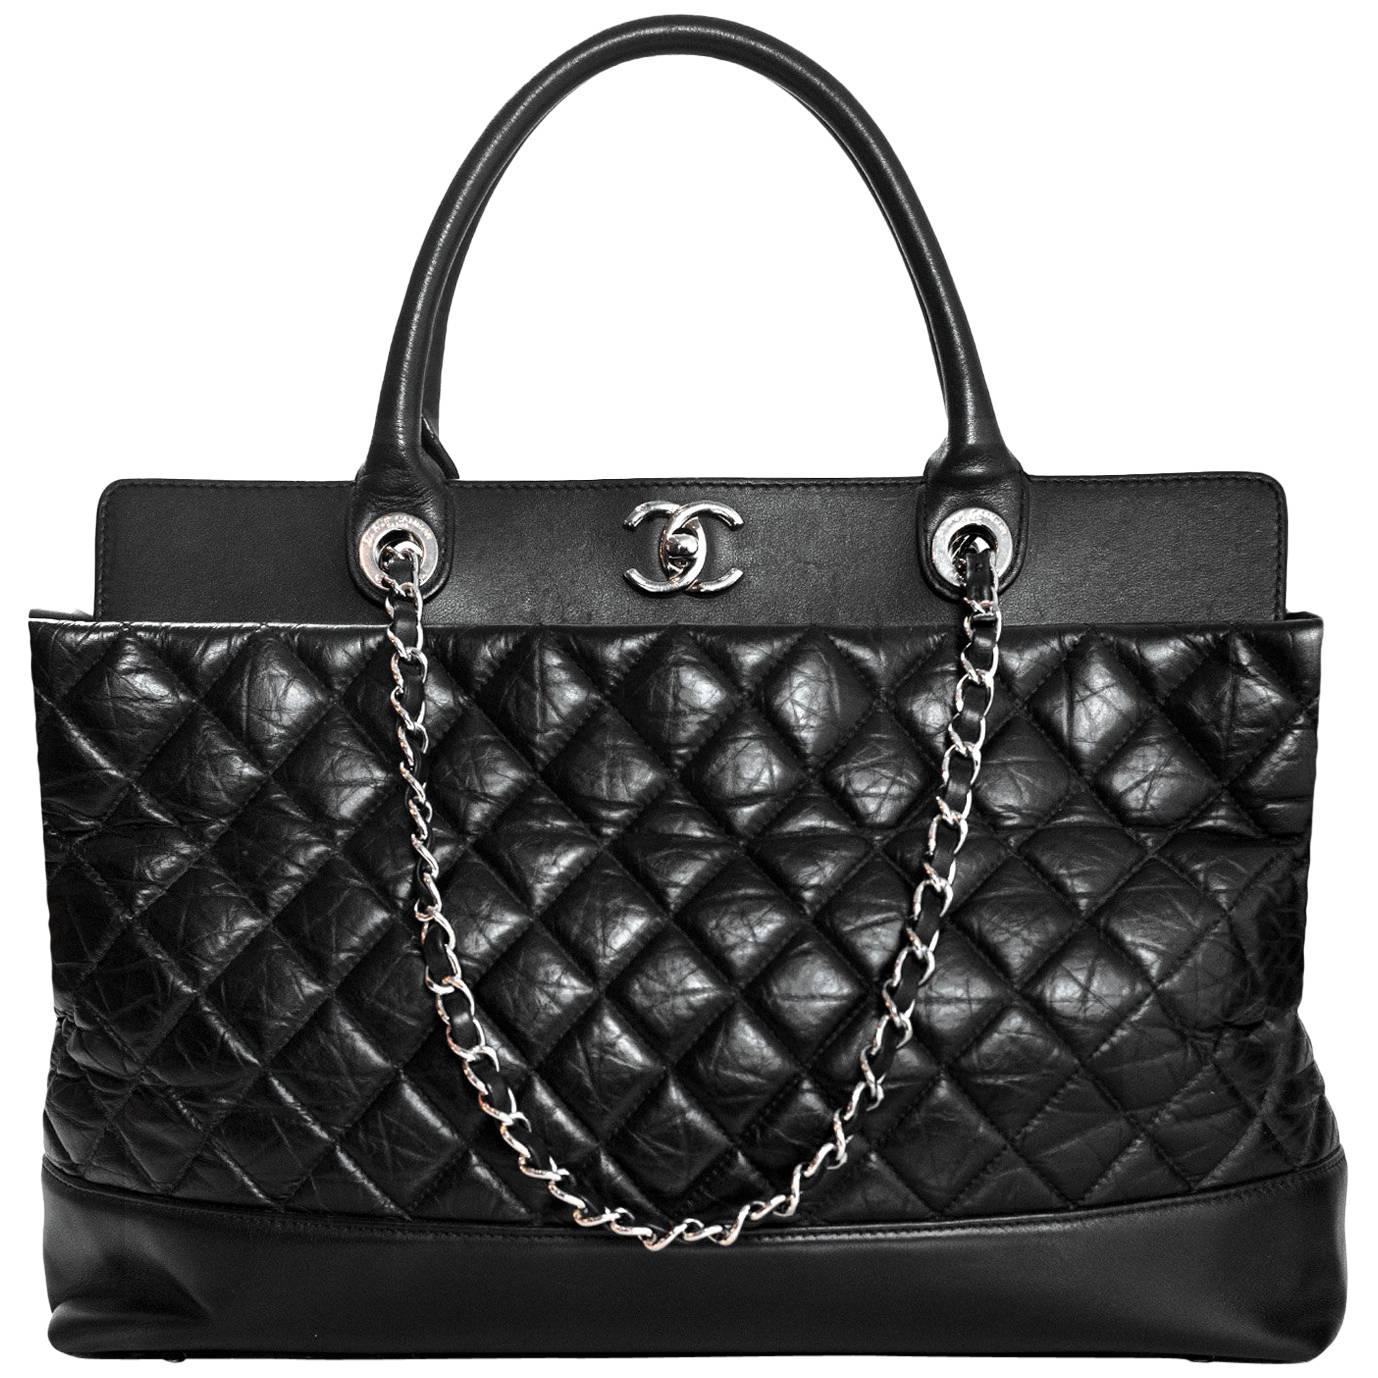 Chanel Black Aged Calfskin Leather Quilted Be CC Double Handle